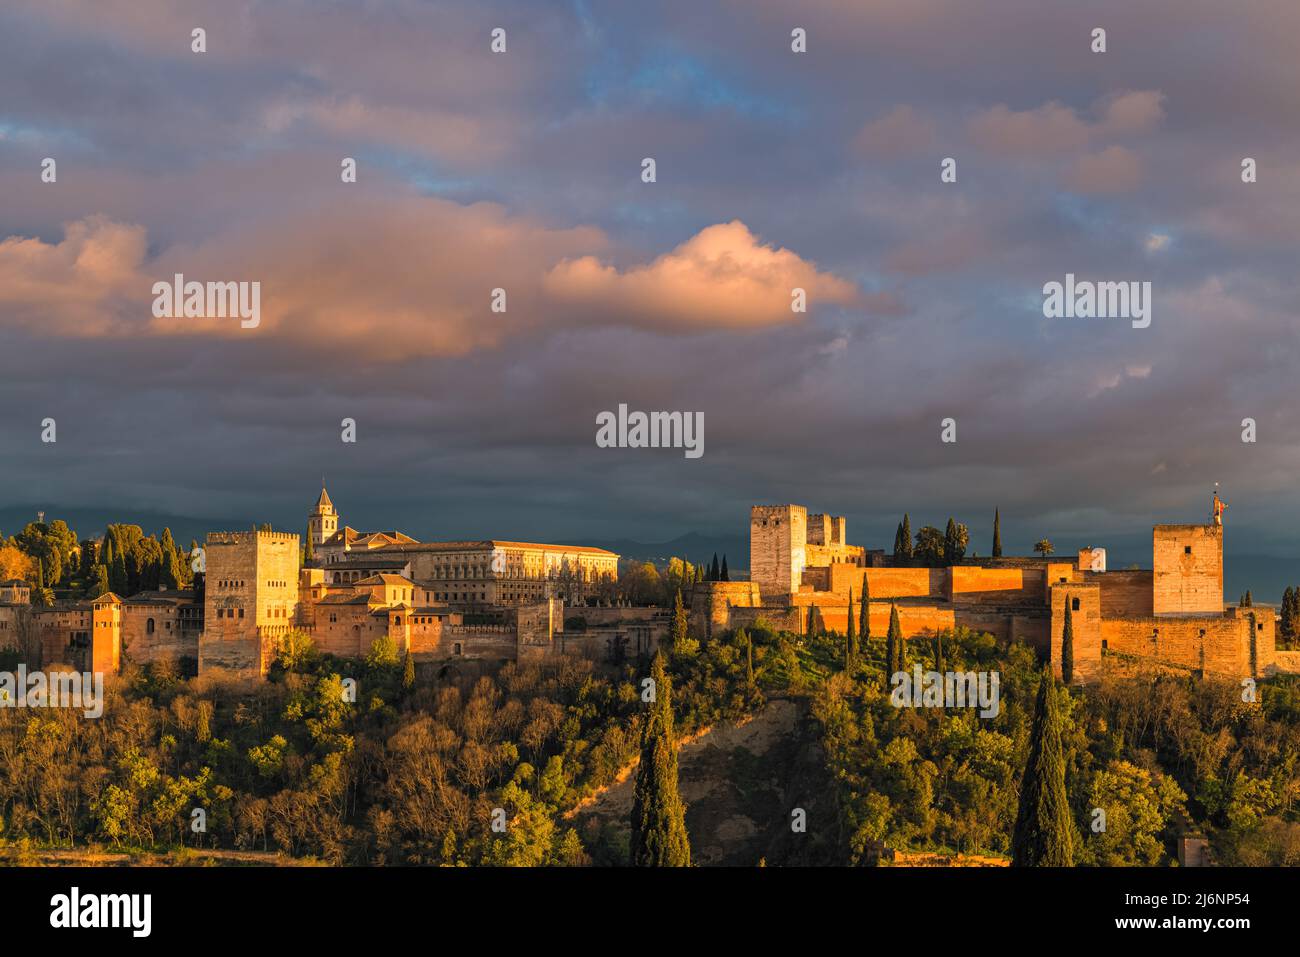 The Alhambra is a palace and fortress complex located in Granada, Andalusia, Spain. It is one of the most famous monuments of Islamic architecture and Stock Photo